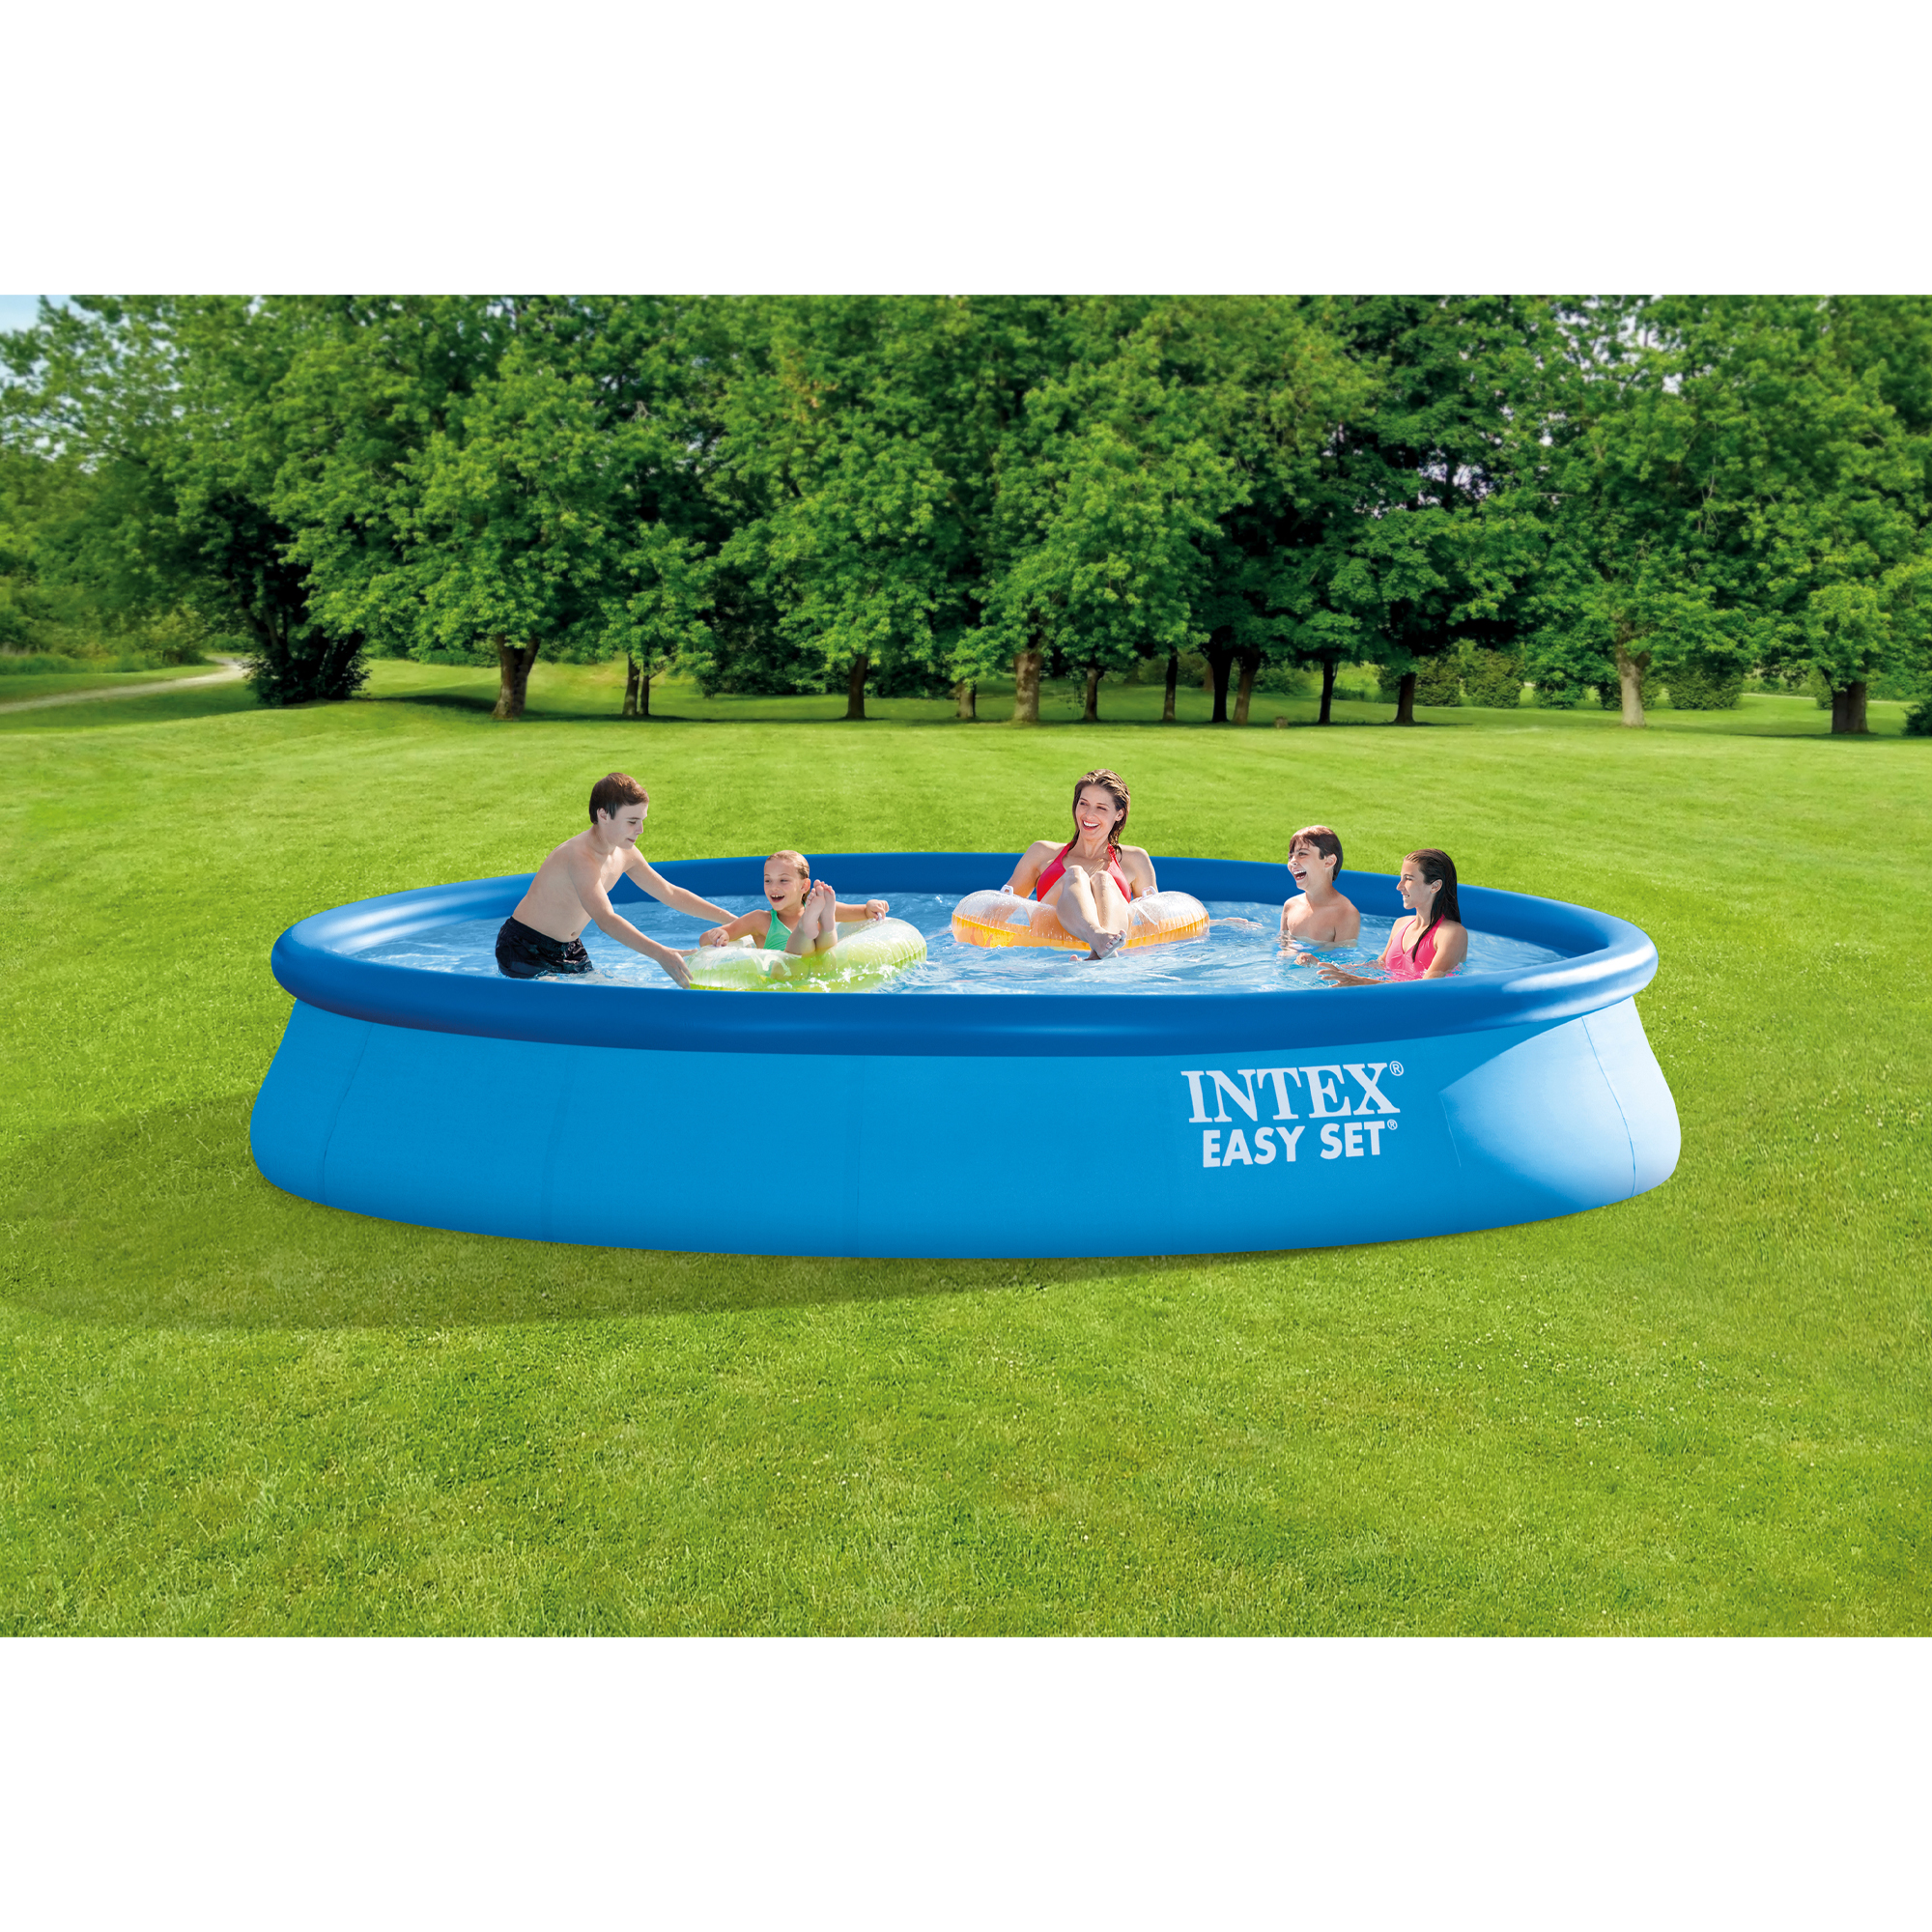 Intex Easy Set 15ft x 33in Inflatable Kid Family Swimming Pool with Filter Pump - image 3 of 12